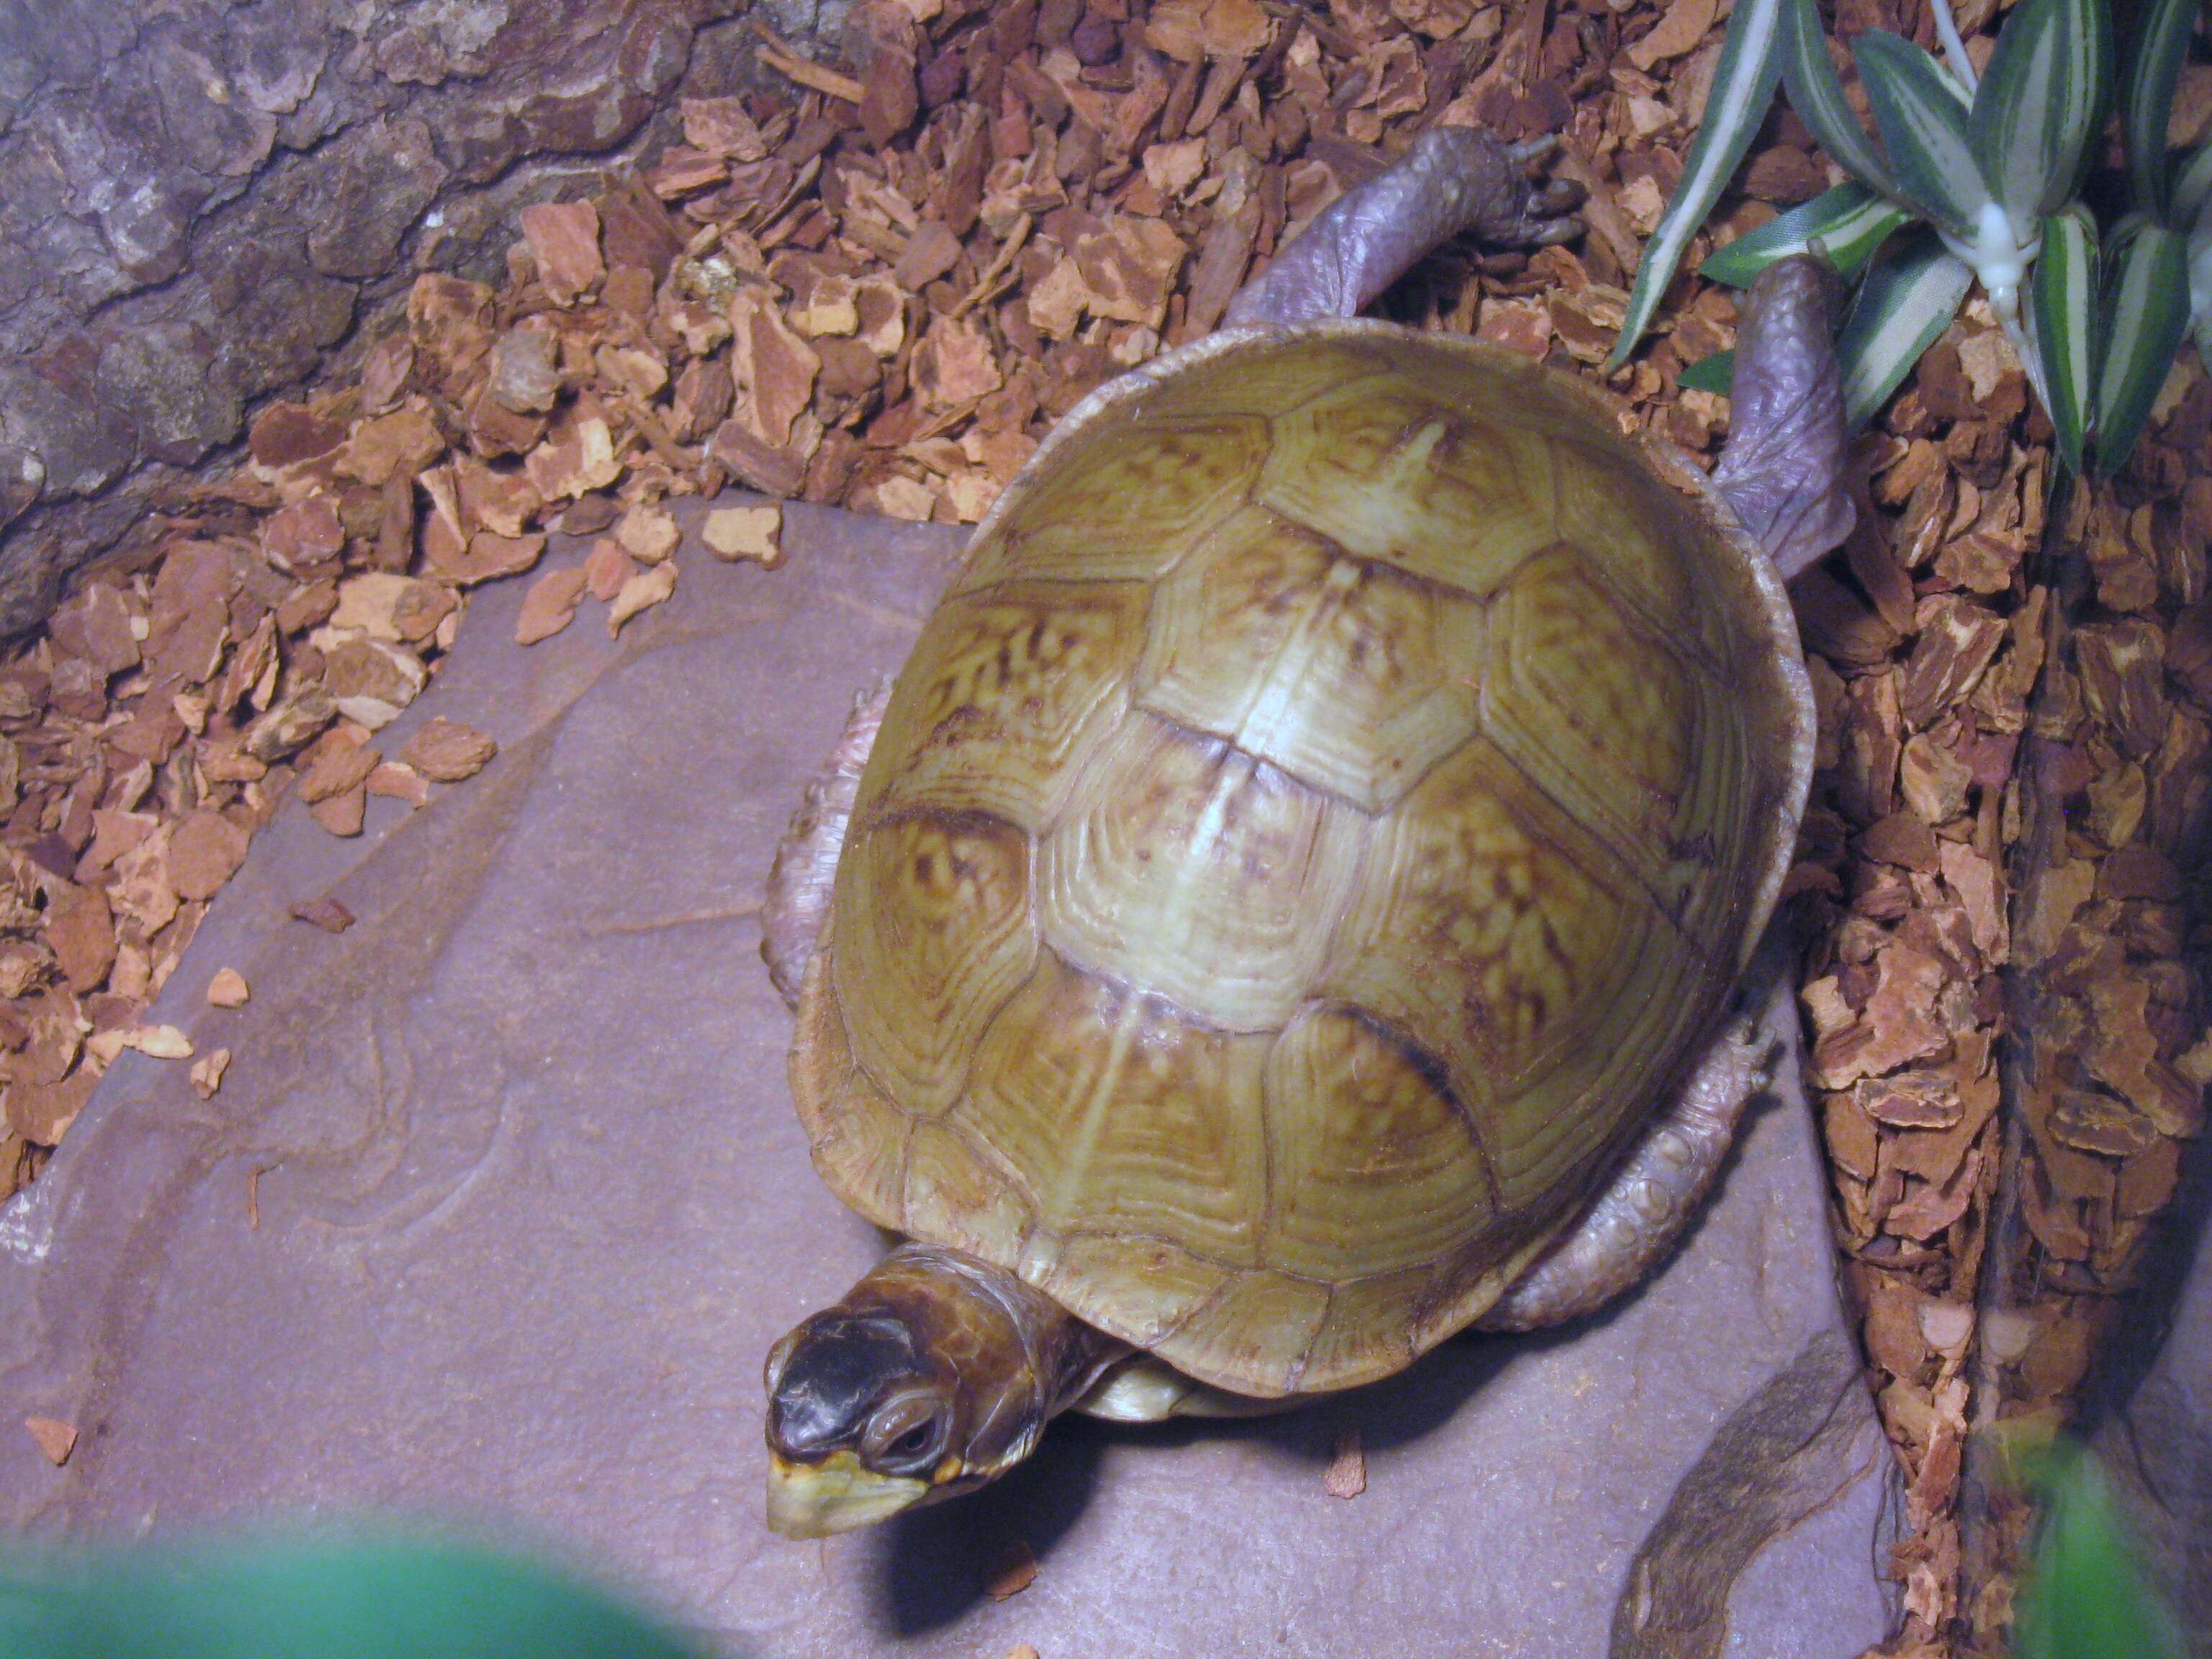 Image of Mexican box turtle